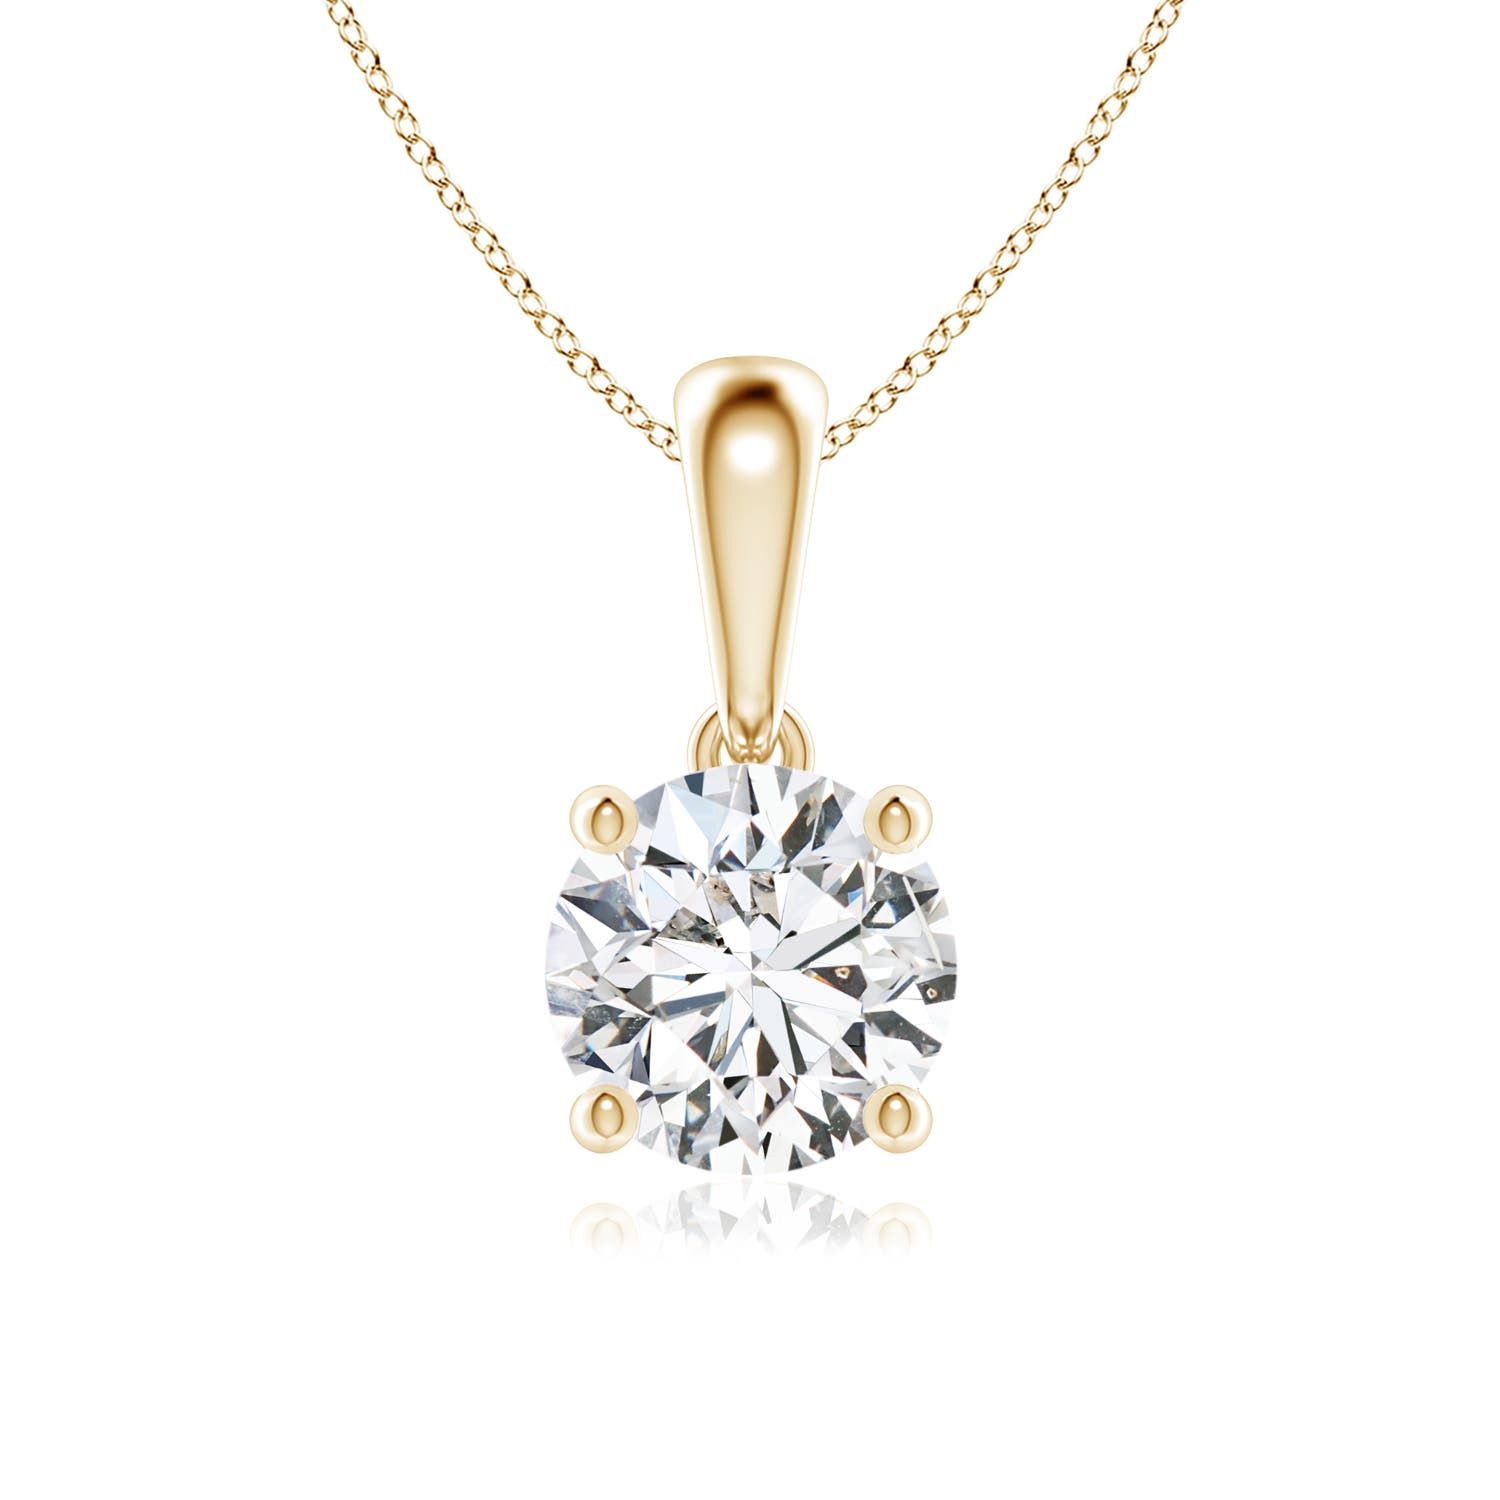 H, SI2 / 1.03 CT / 14 KT Yellow Gold